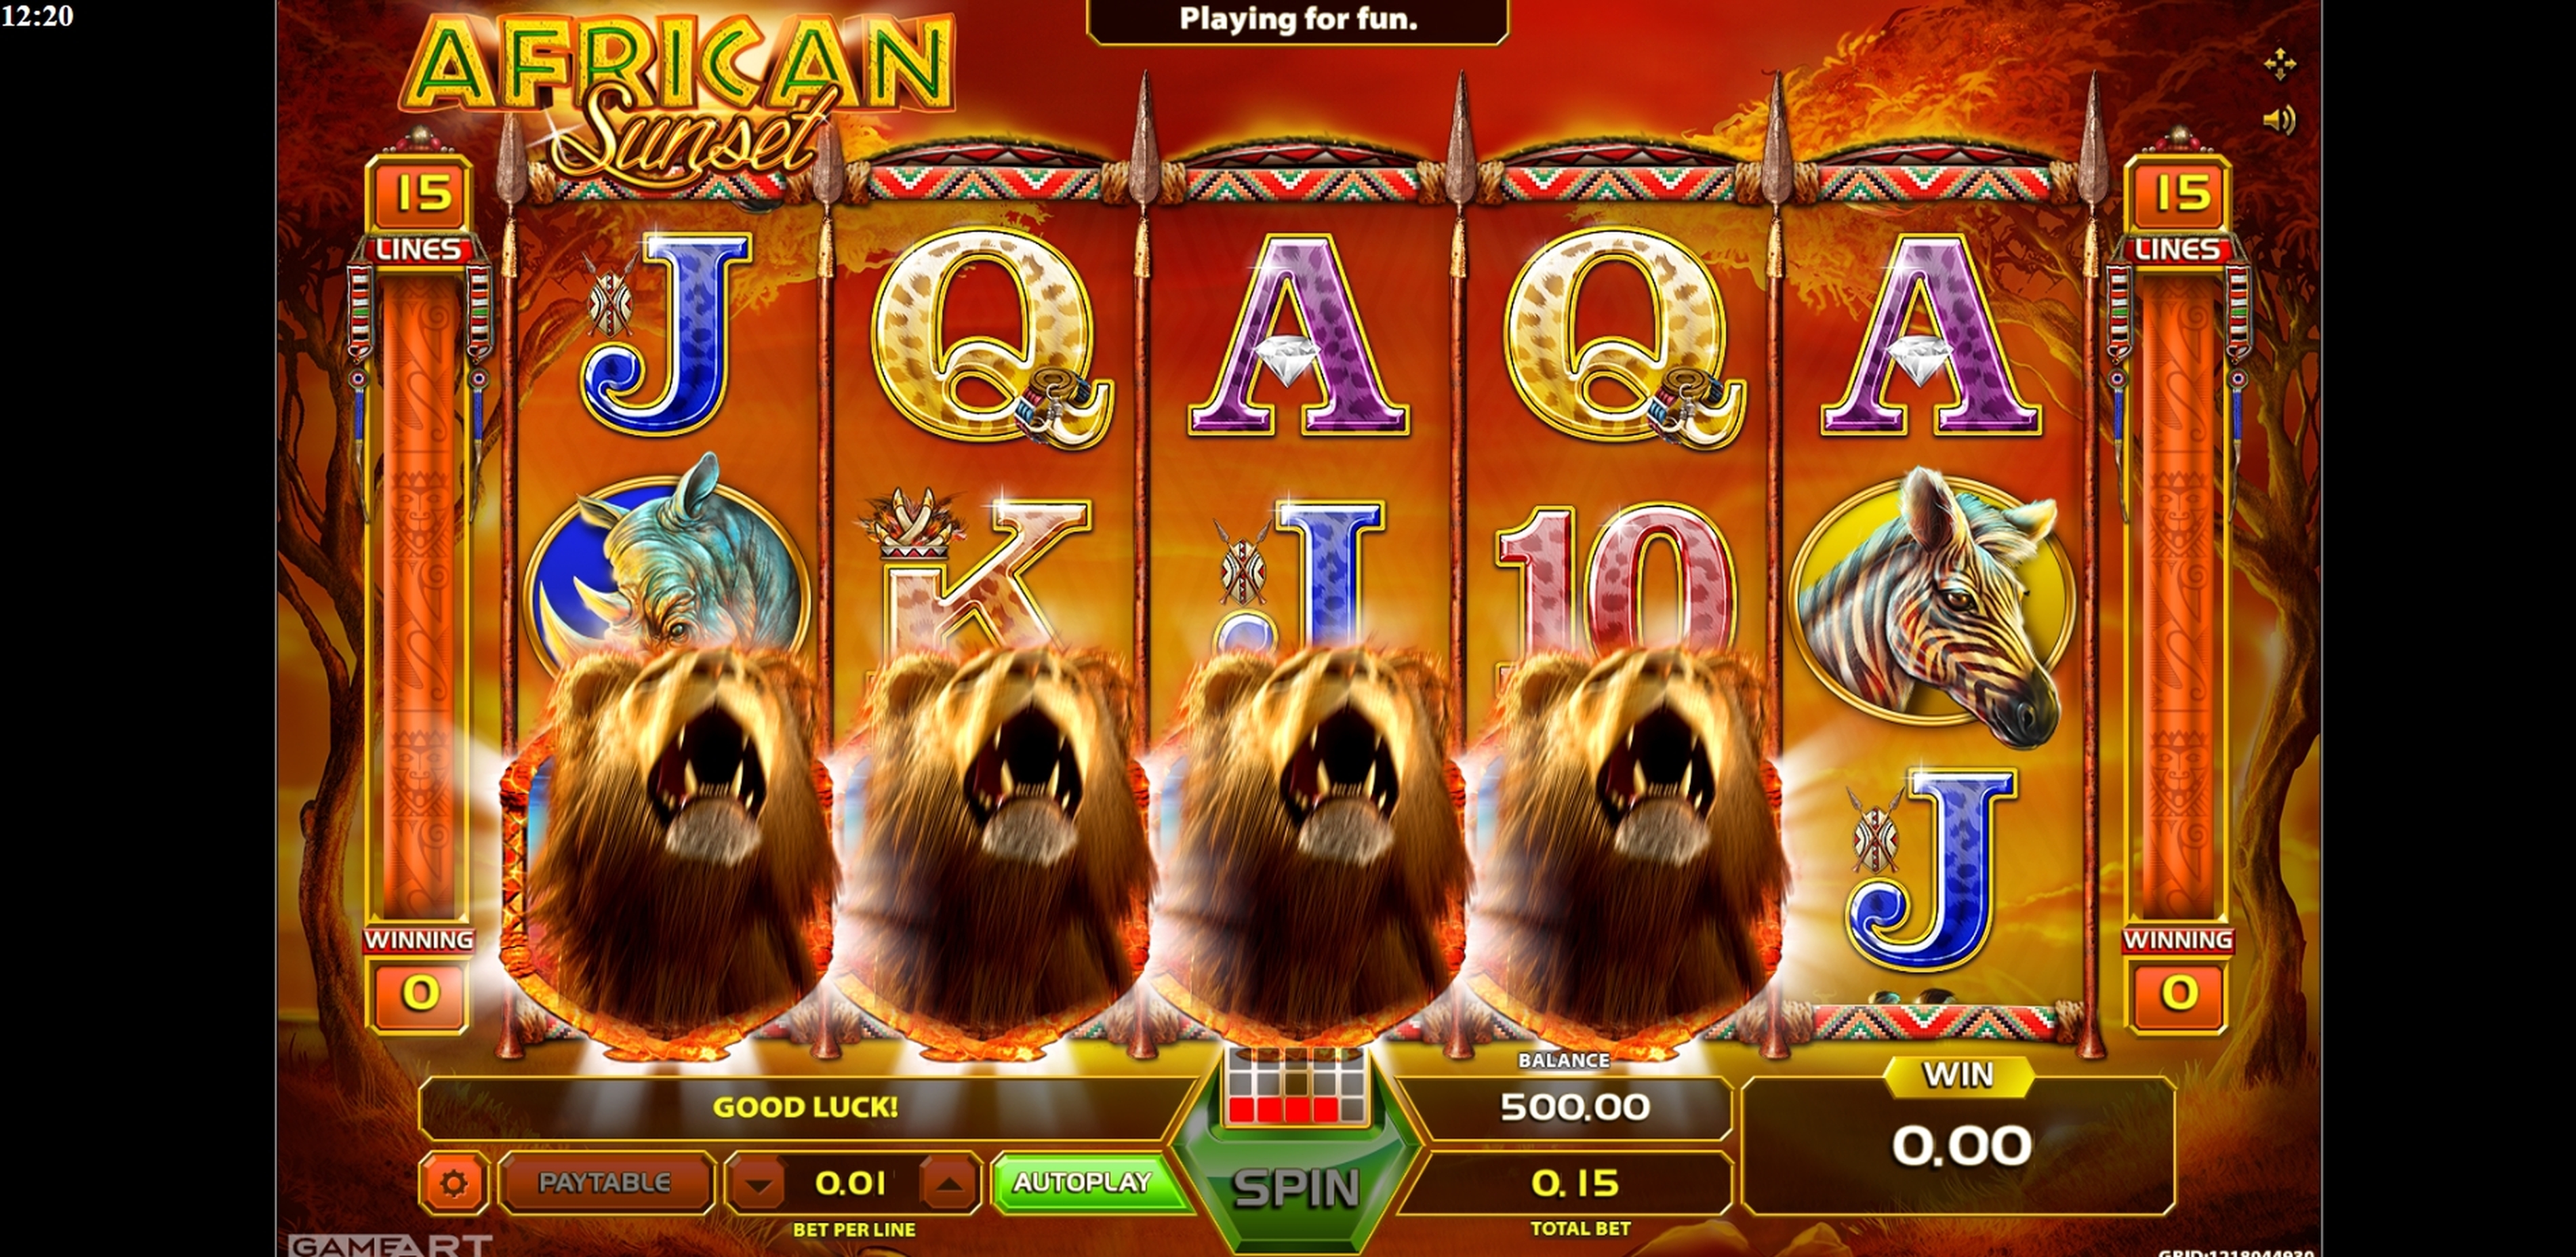 Win Money in African Sunset Free Slot Game by GameArt